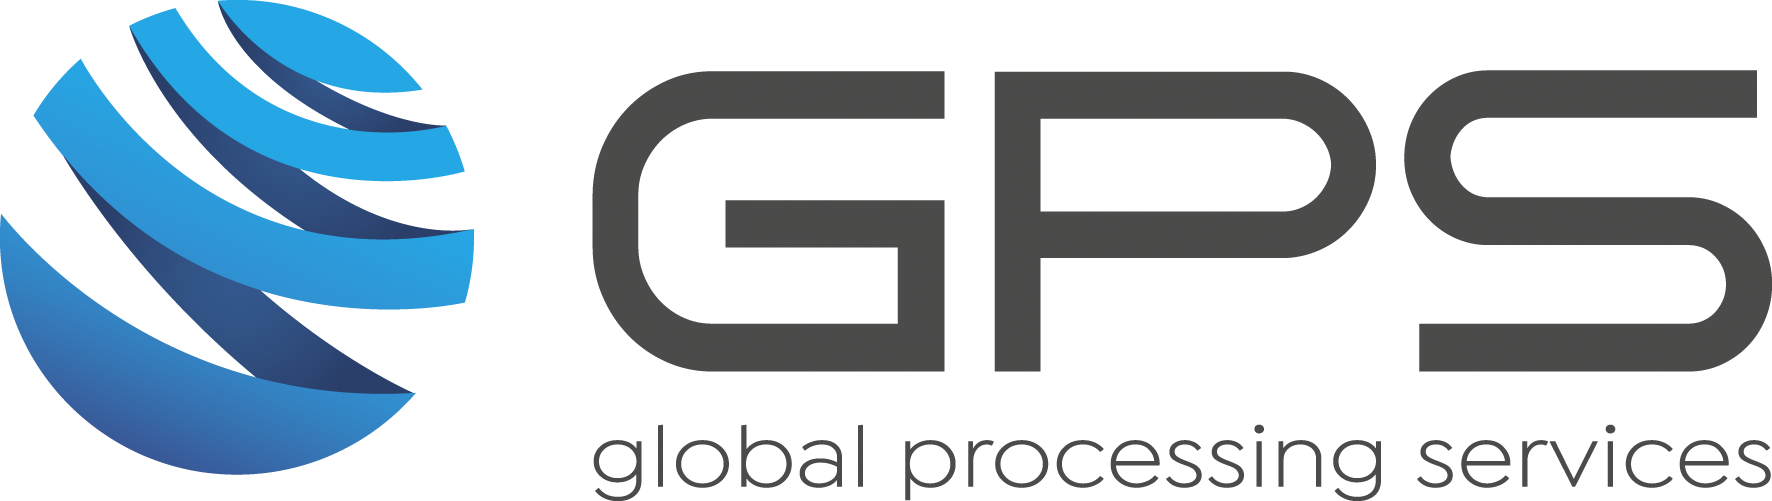 Global Processing Services raises over US$300 Million to Accelerate Technology Development and Global Growth